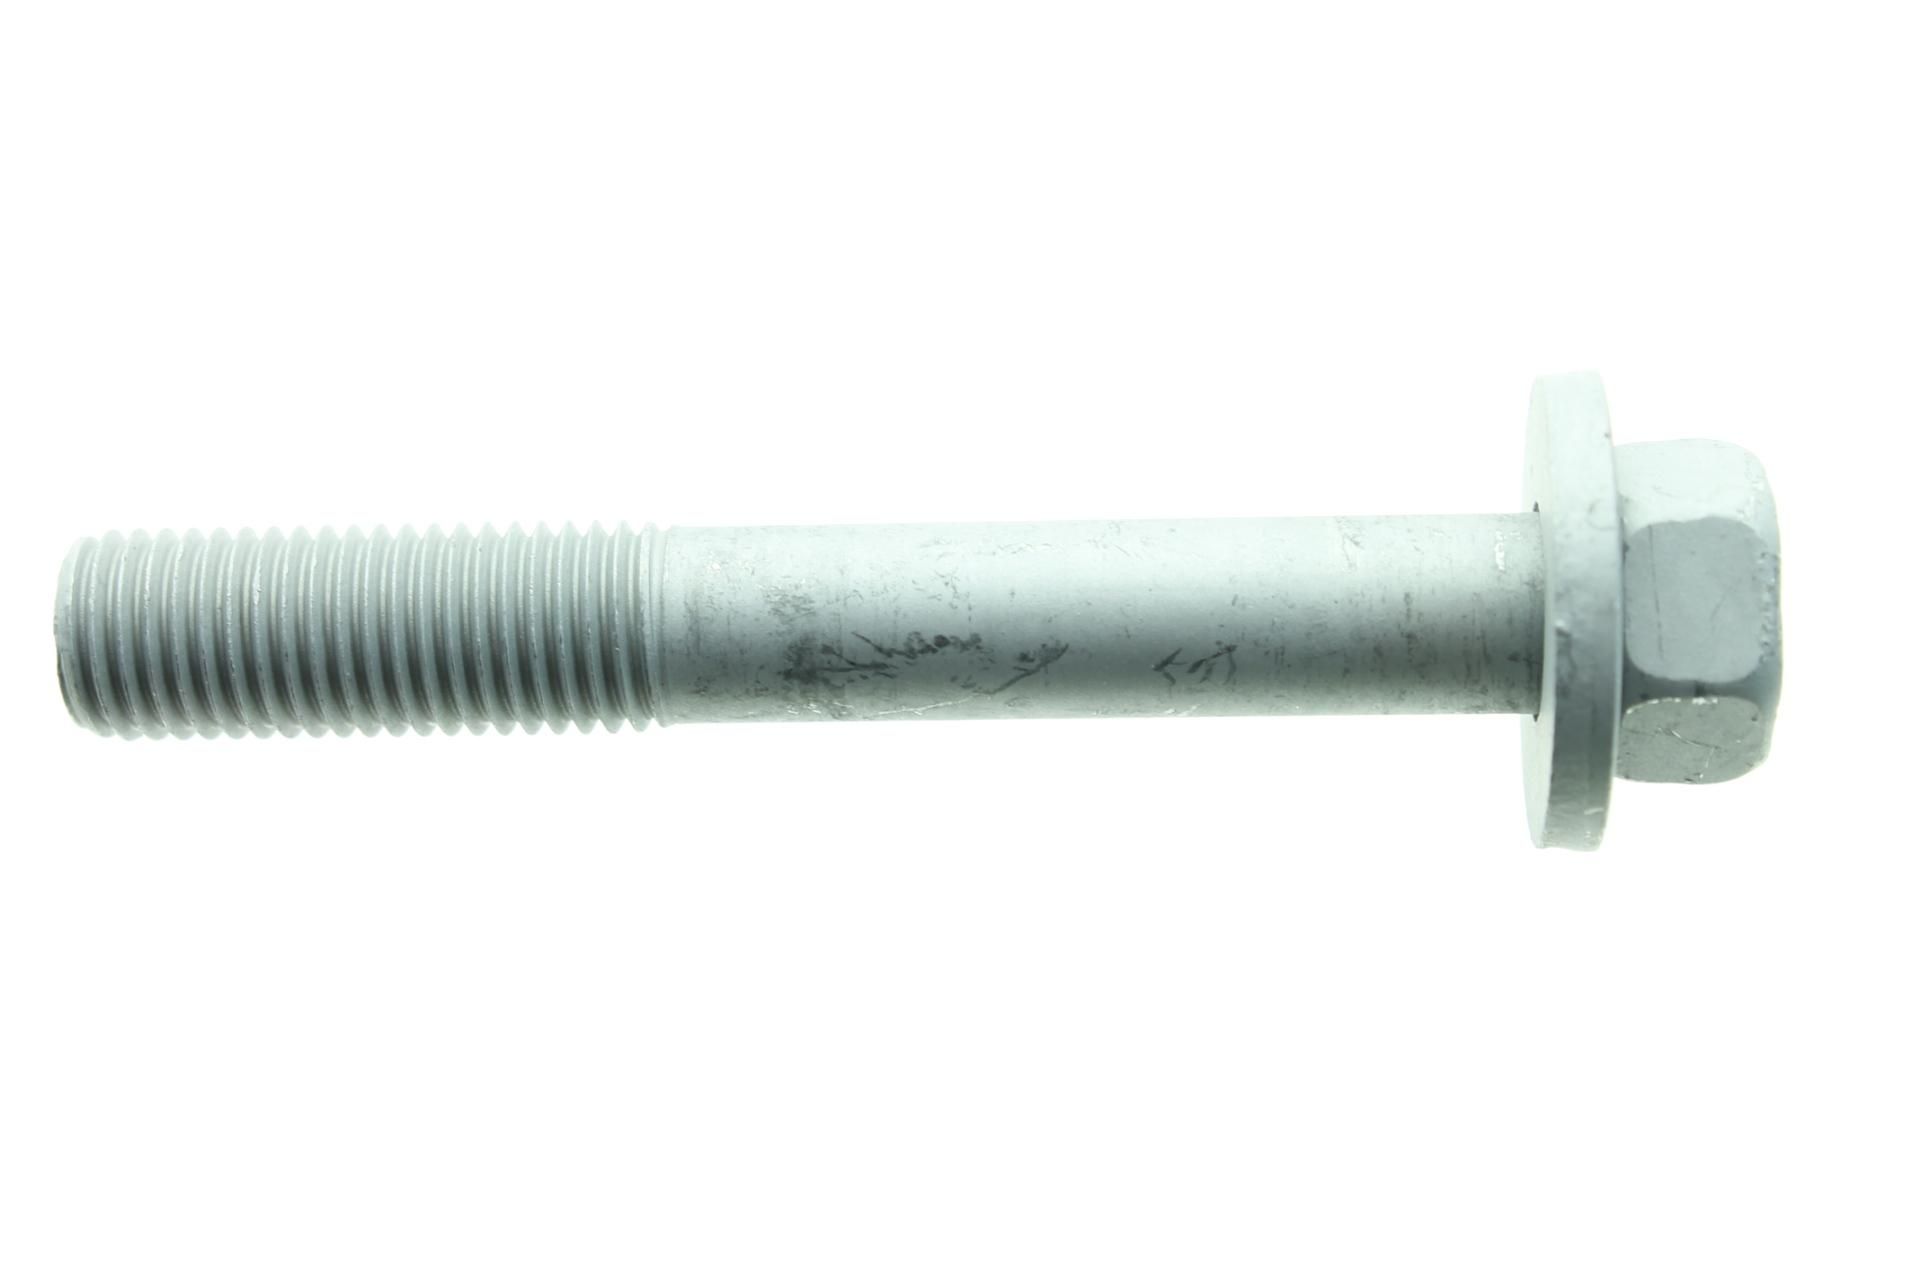 90119-10M23-00 BOLT, WITH WASHER